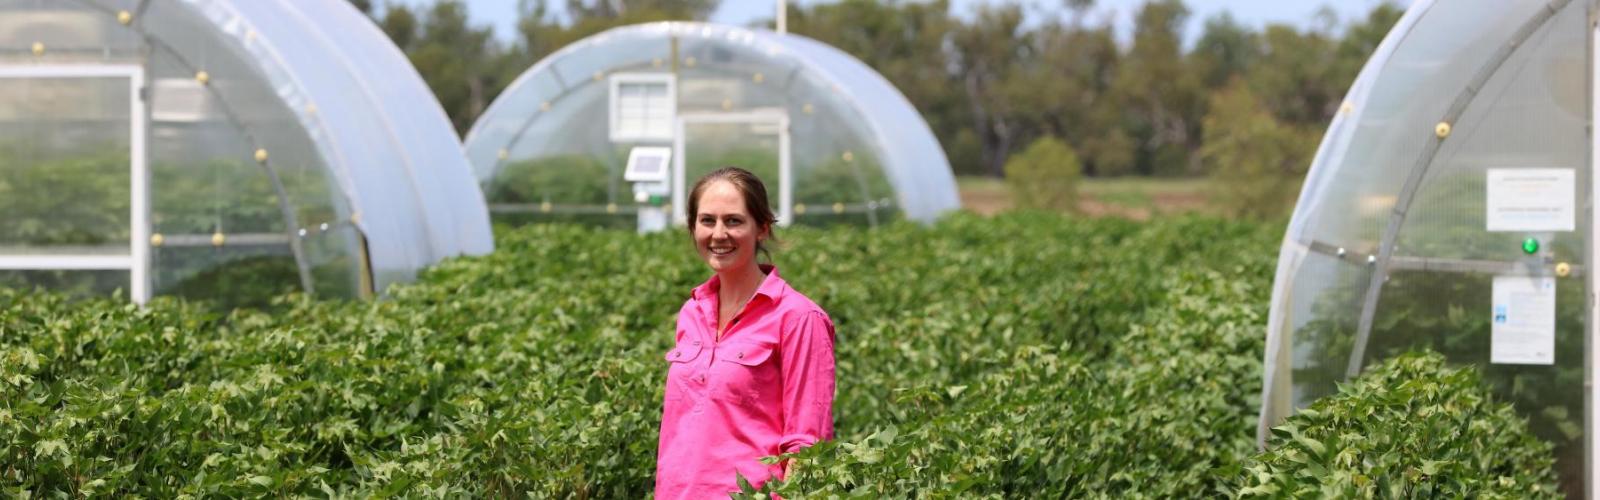 Cotton researcher in a pink shirt standing in a cotton trial paddock. In the background are cotton glasshouses.